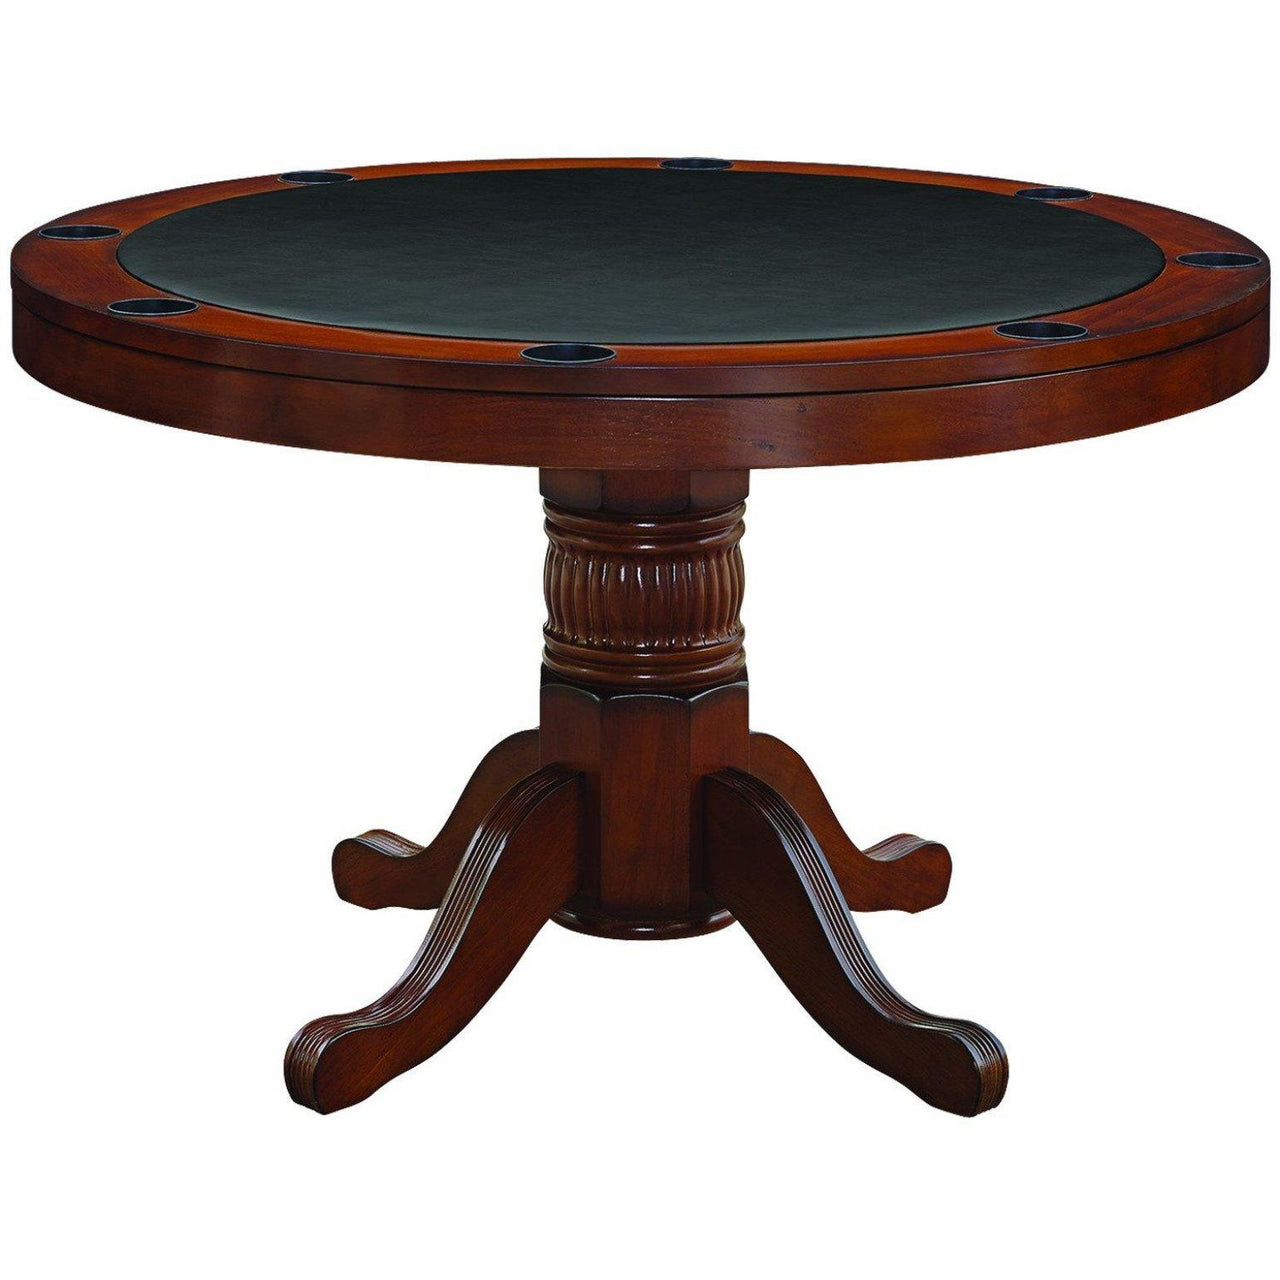 Convertible Round Poker & Dining Table with Convenient Storage, 48'', by RAM Game Room-AMERICANA-POKER-TABLES